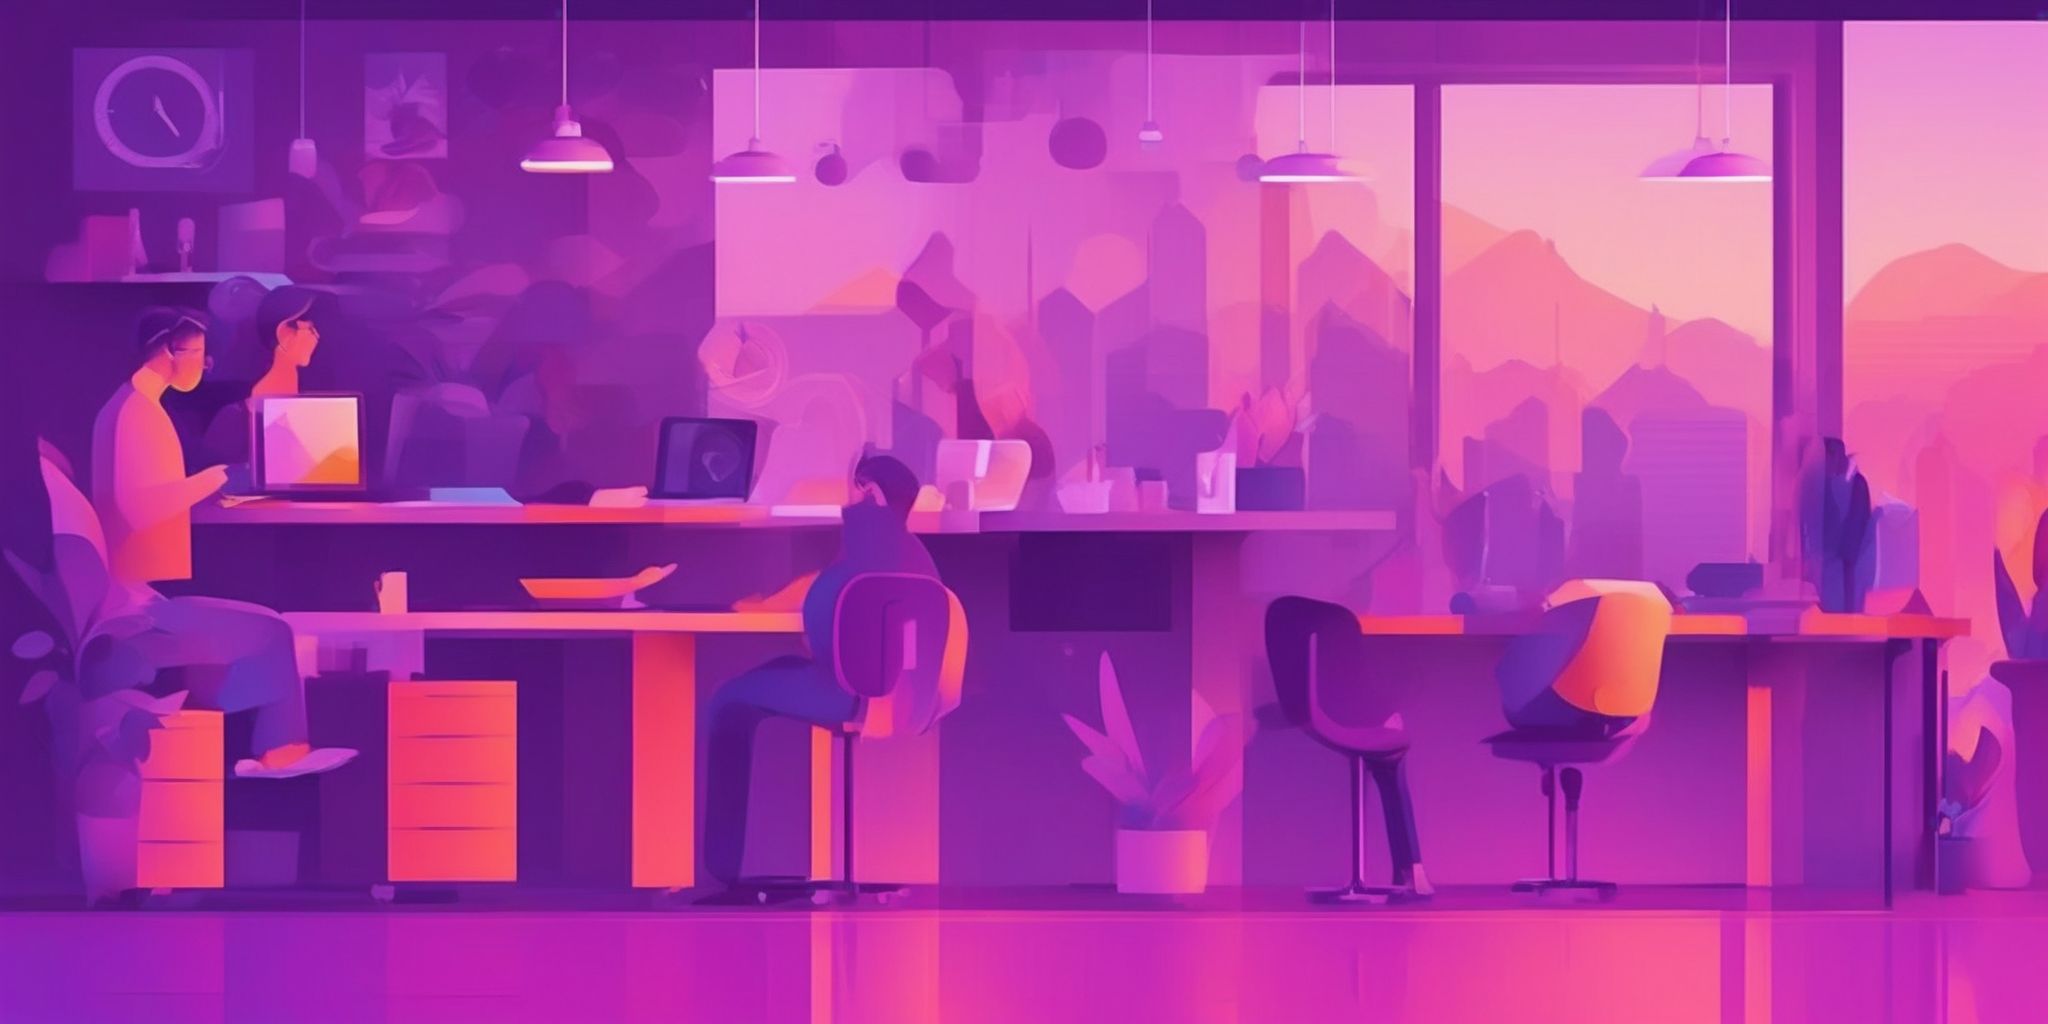 Inspection in flat illustration style, colorful purple gradient colors